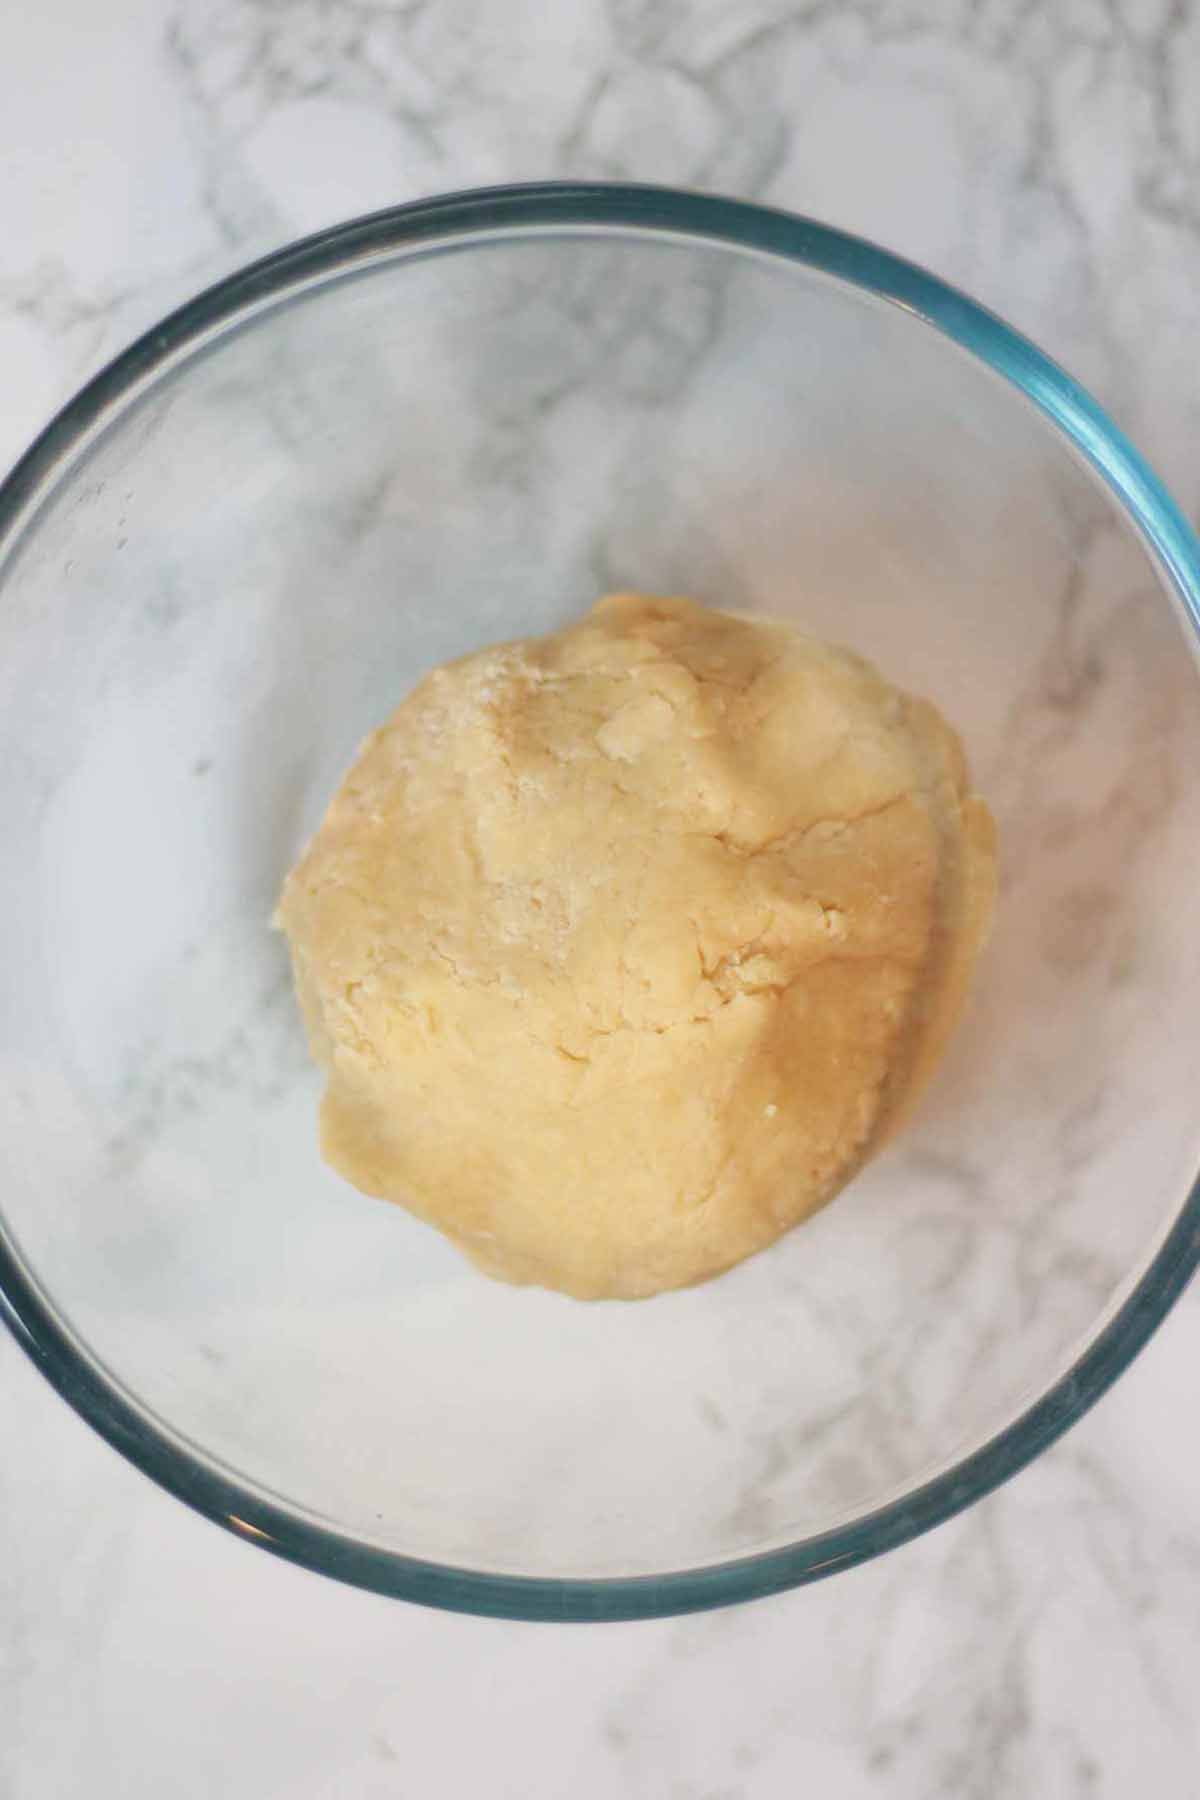 Ball Of dairy-free Pastry Dough In A Bowl